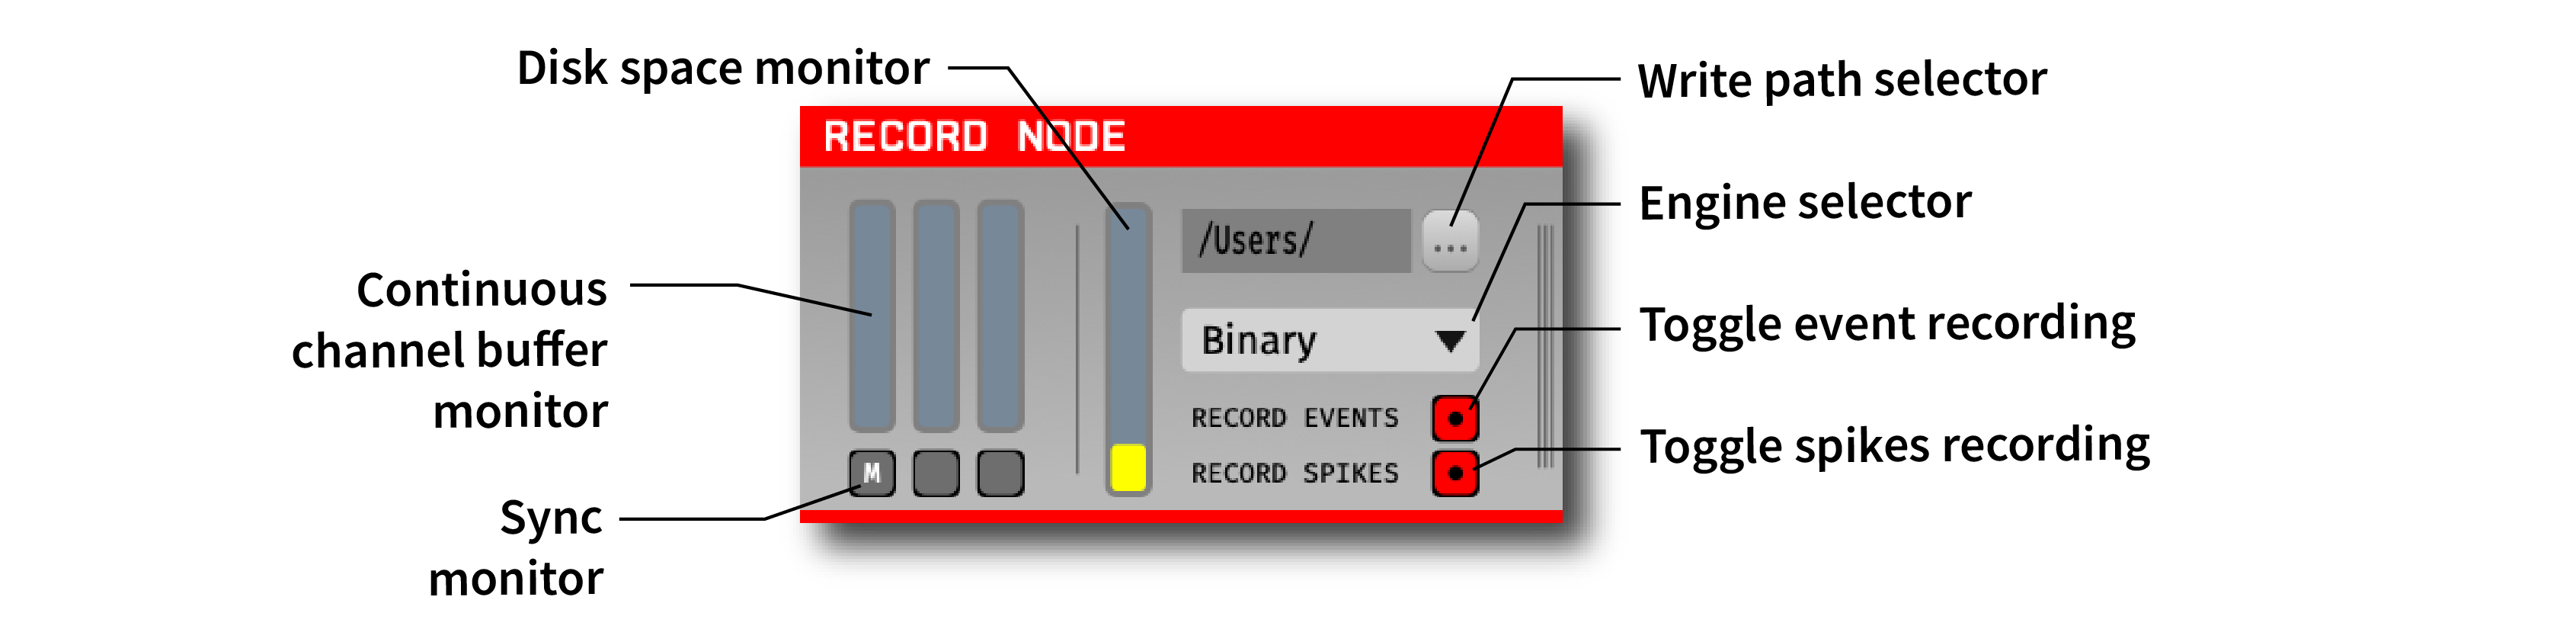 The Record Node interface